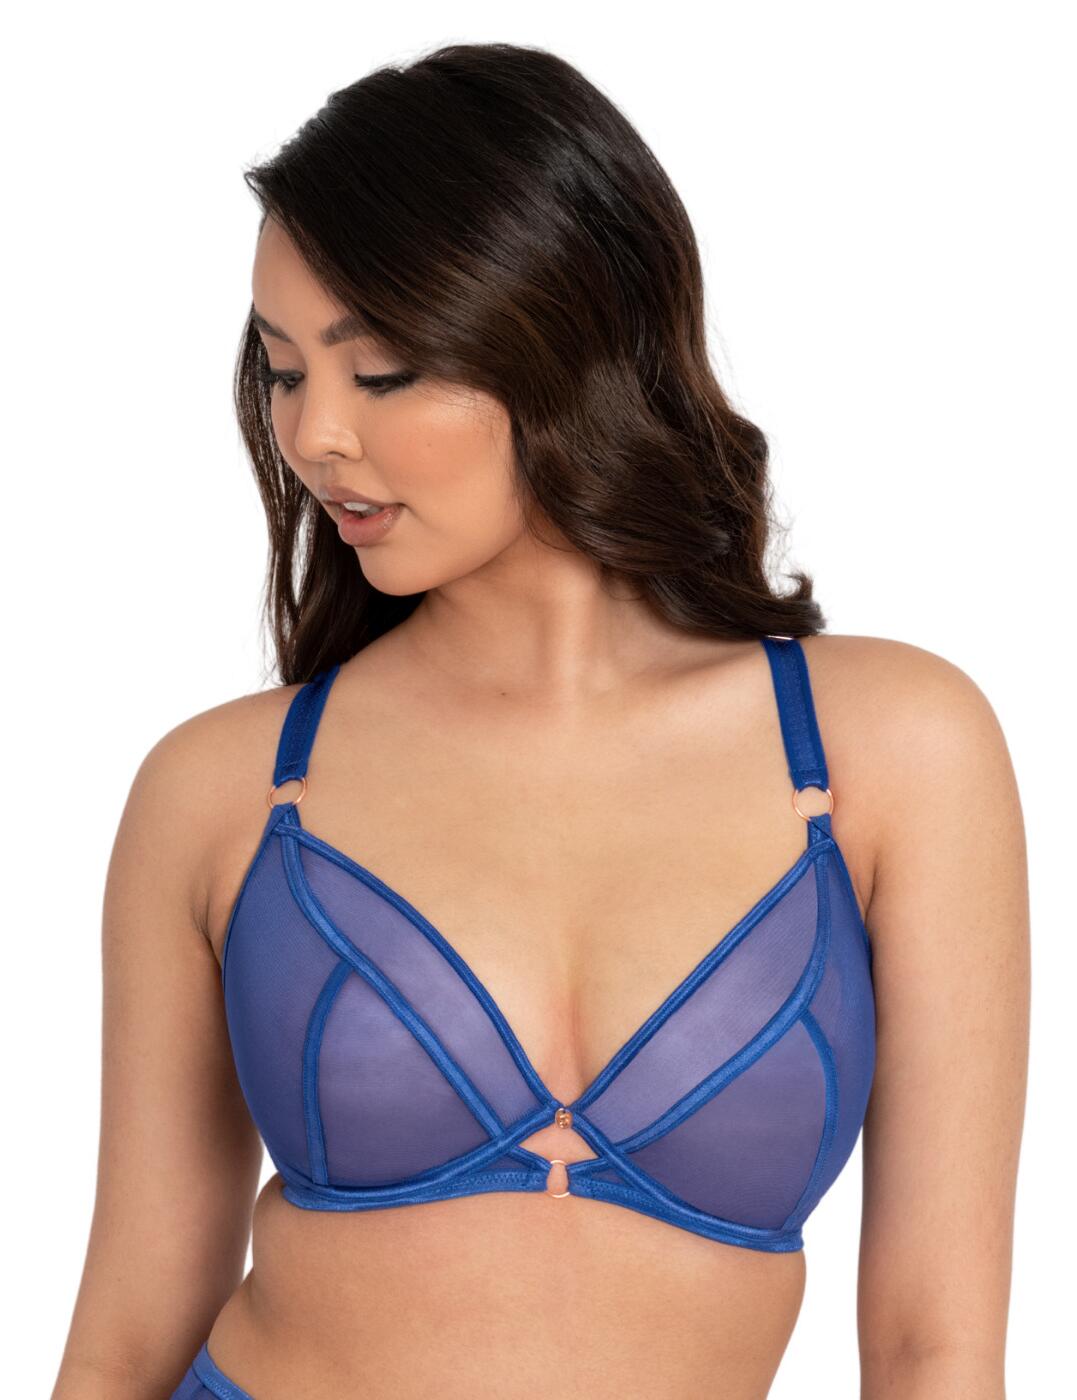 Shop for Scantilly by Curvy Kate, Lingerie, Womens